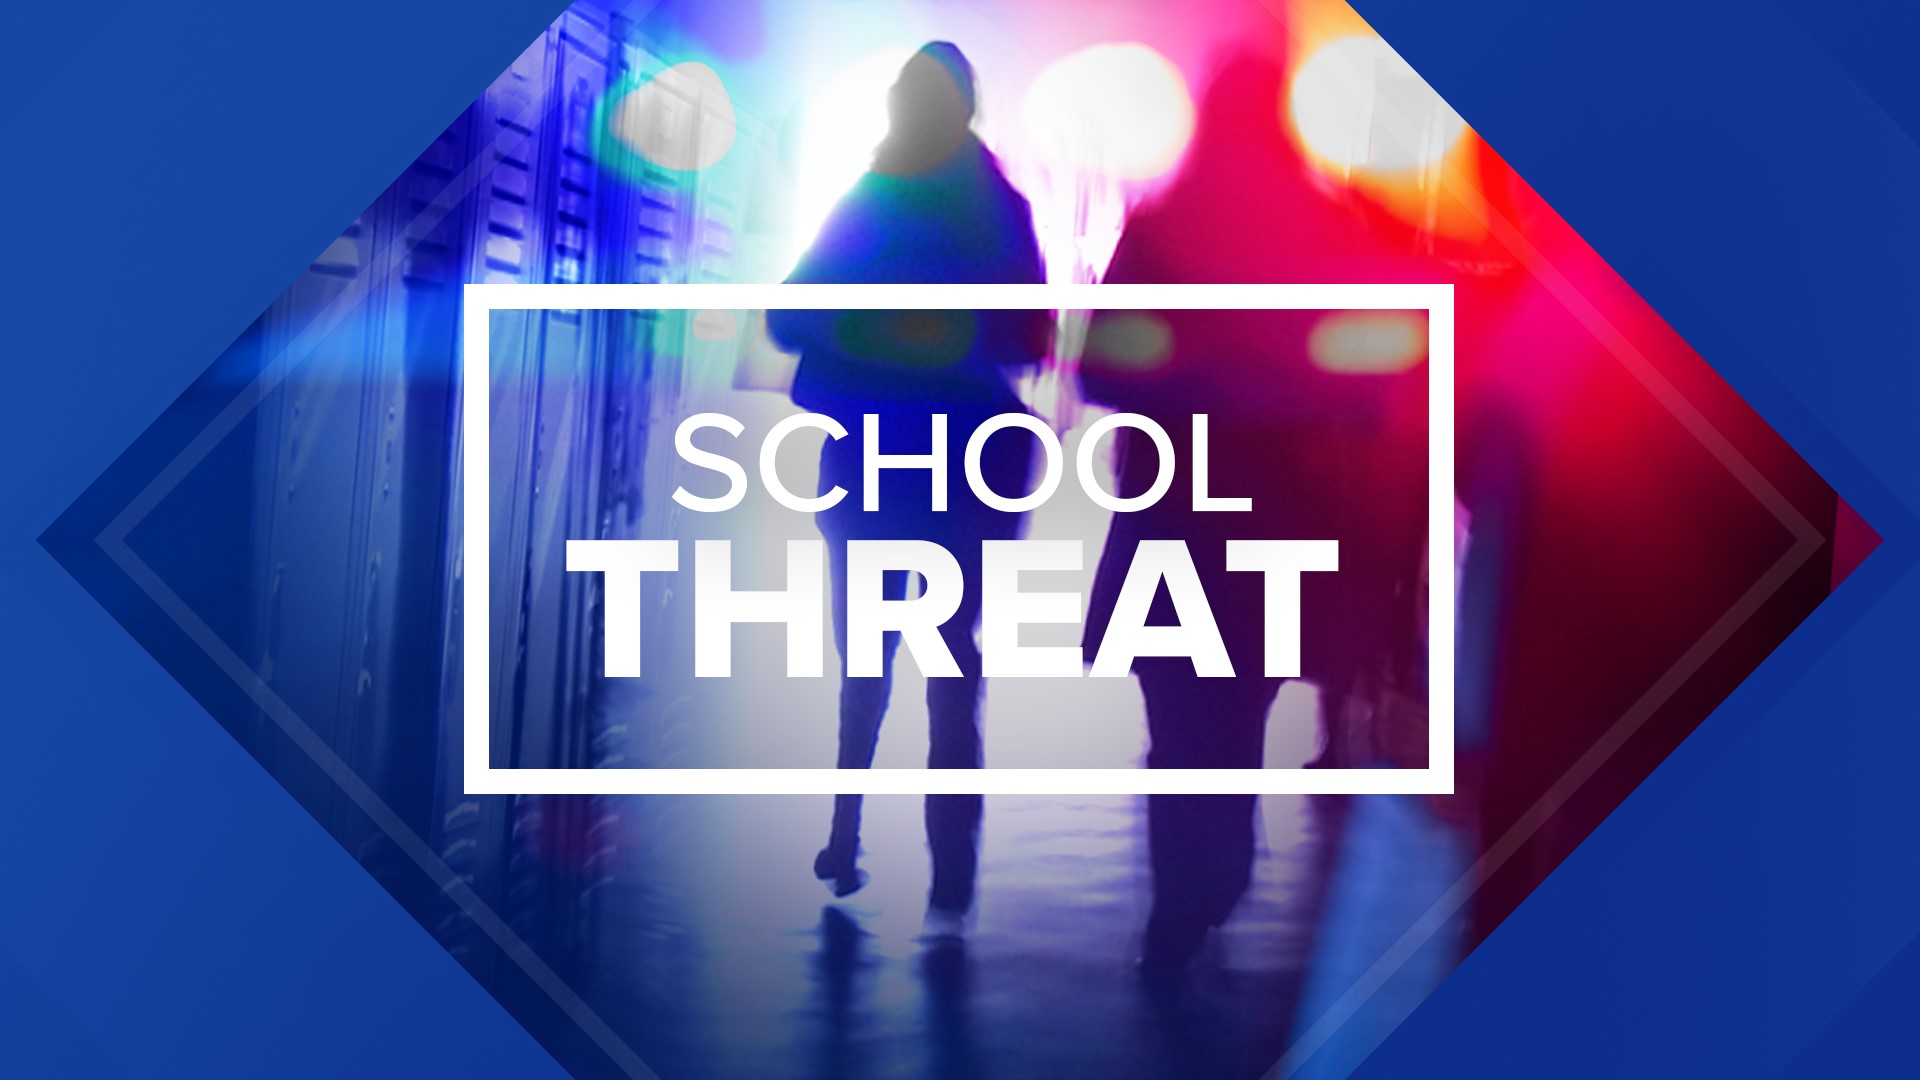 A number of area schools closed after threats were received on Monday. The Scranton School District delayed classes for two hours after threats were reported.